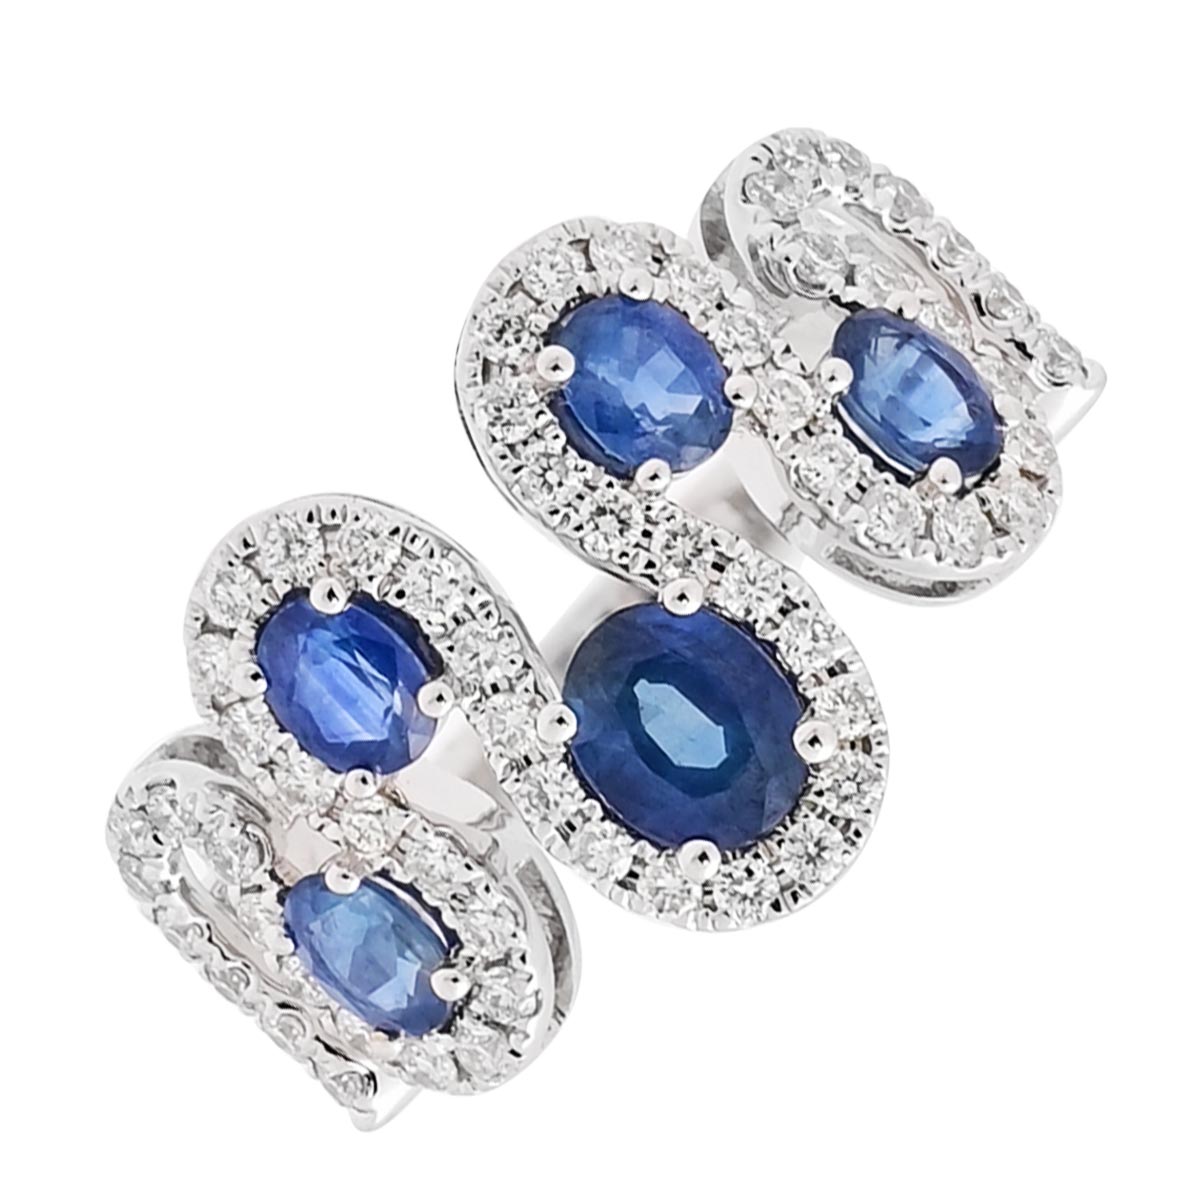 Dabakarov Oval Sapphire Fashion Ring in 14kt White Gold with Diamonds (5/8ct tw)